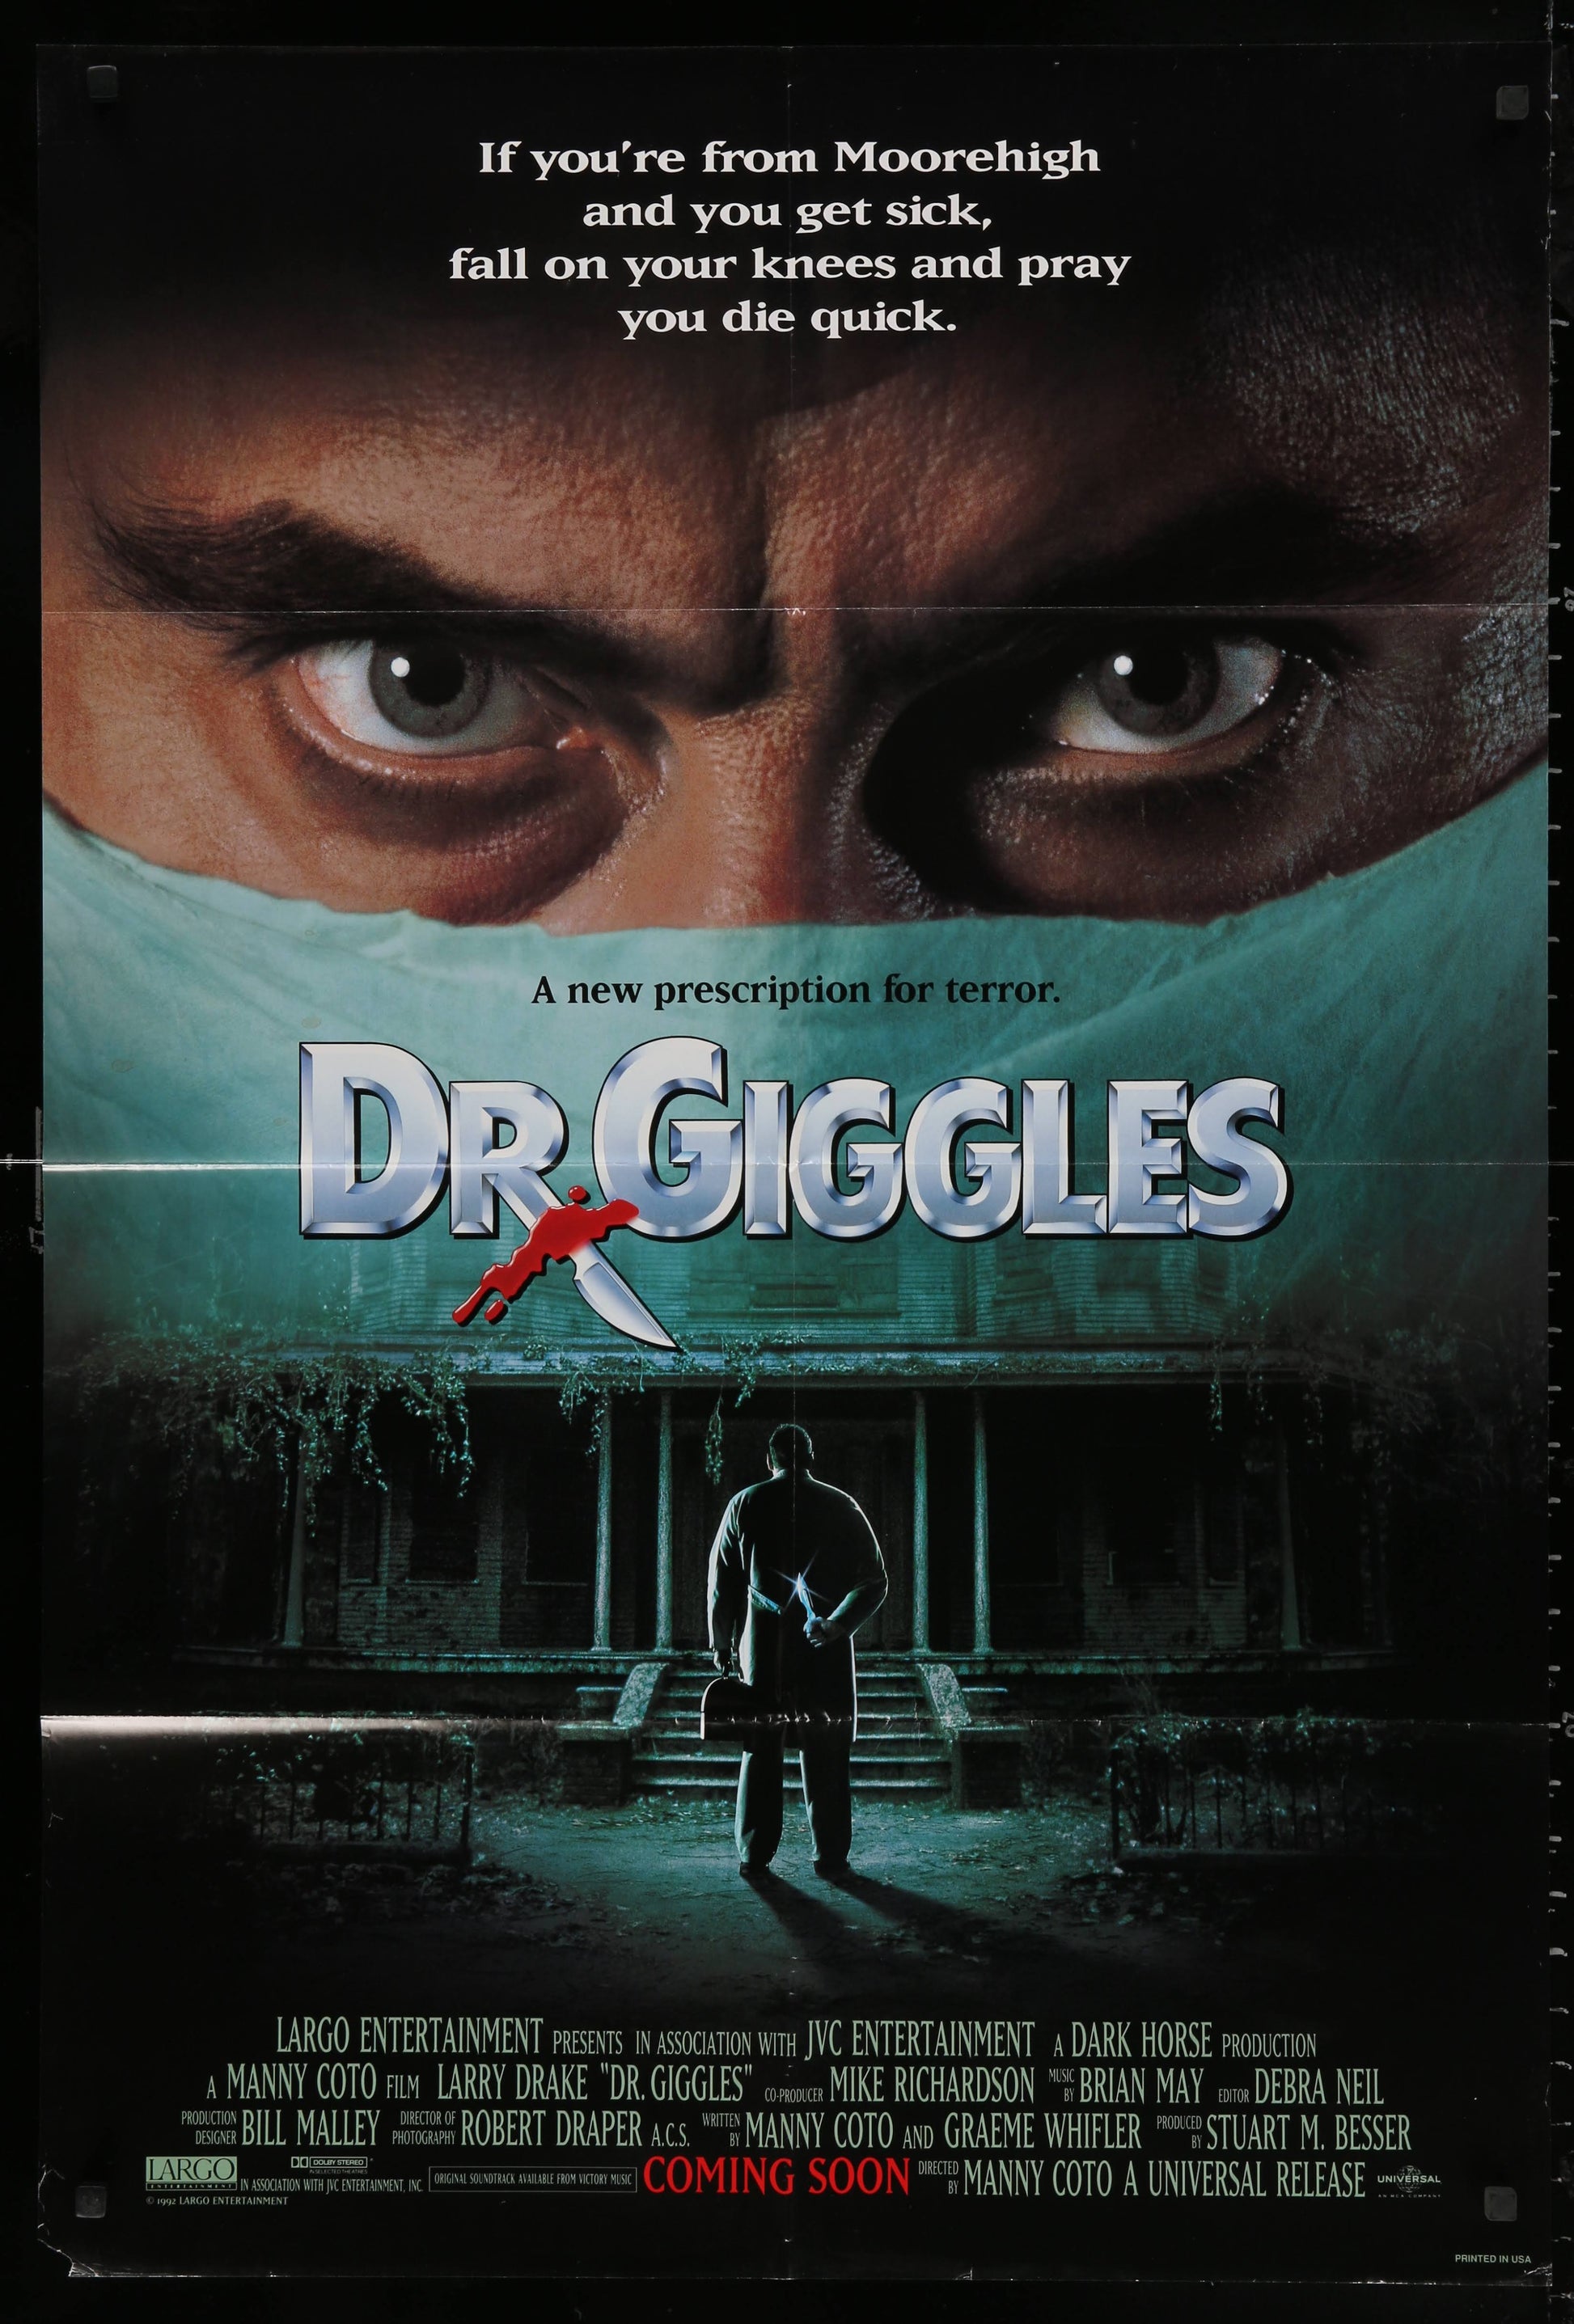 Dr. Giggles US One Sheet (1992) - ORIGINAL RELEASE - posterpalace.com